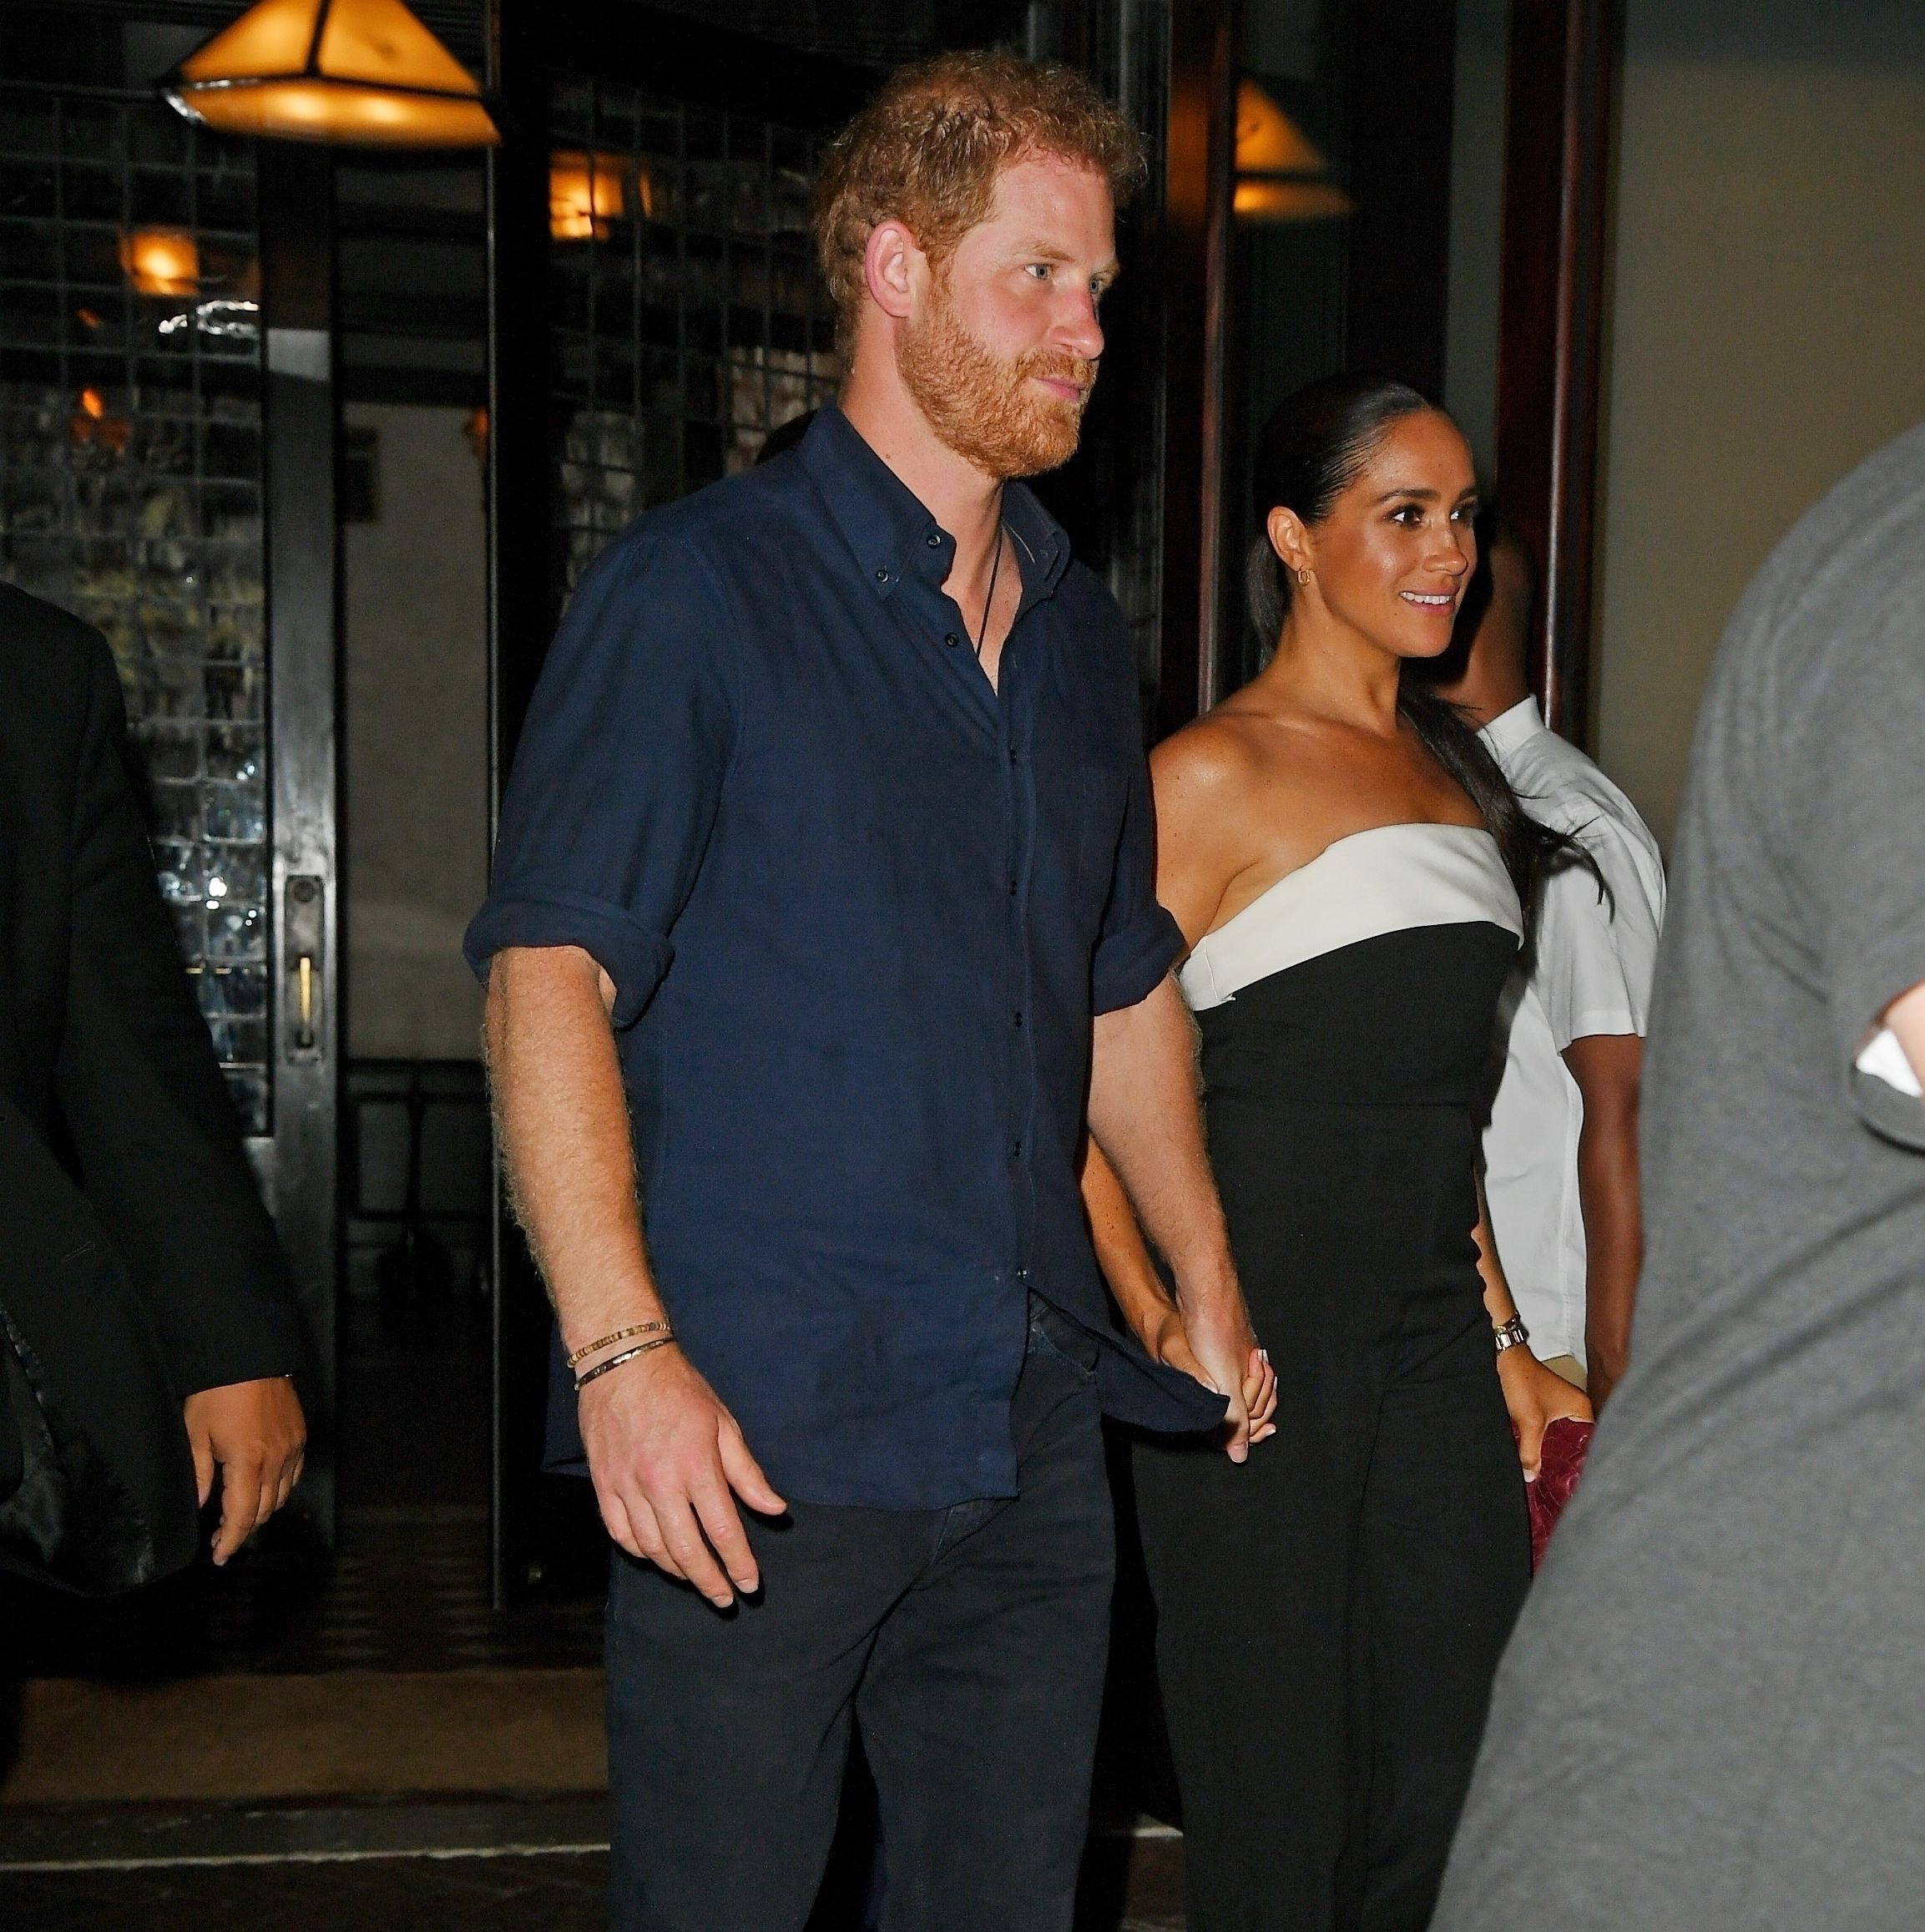 Meghan Markle and Prince Harry Show PDA on Rare Date Night